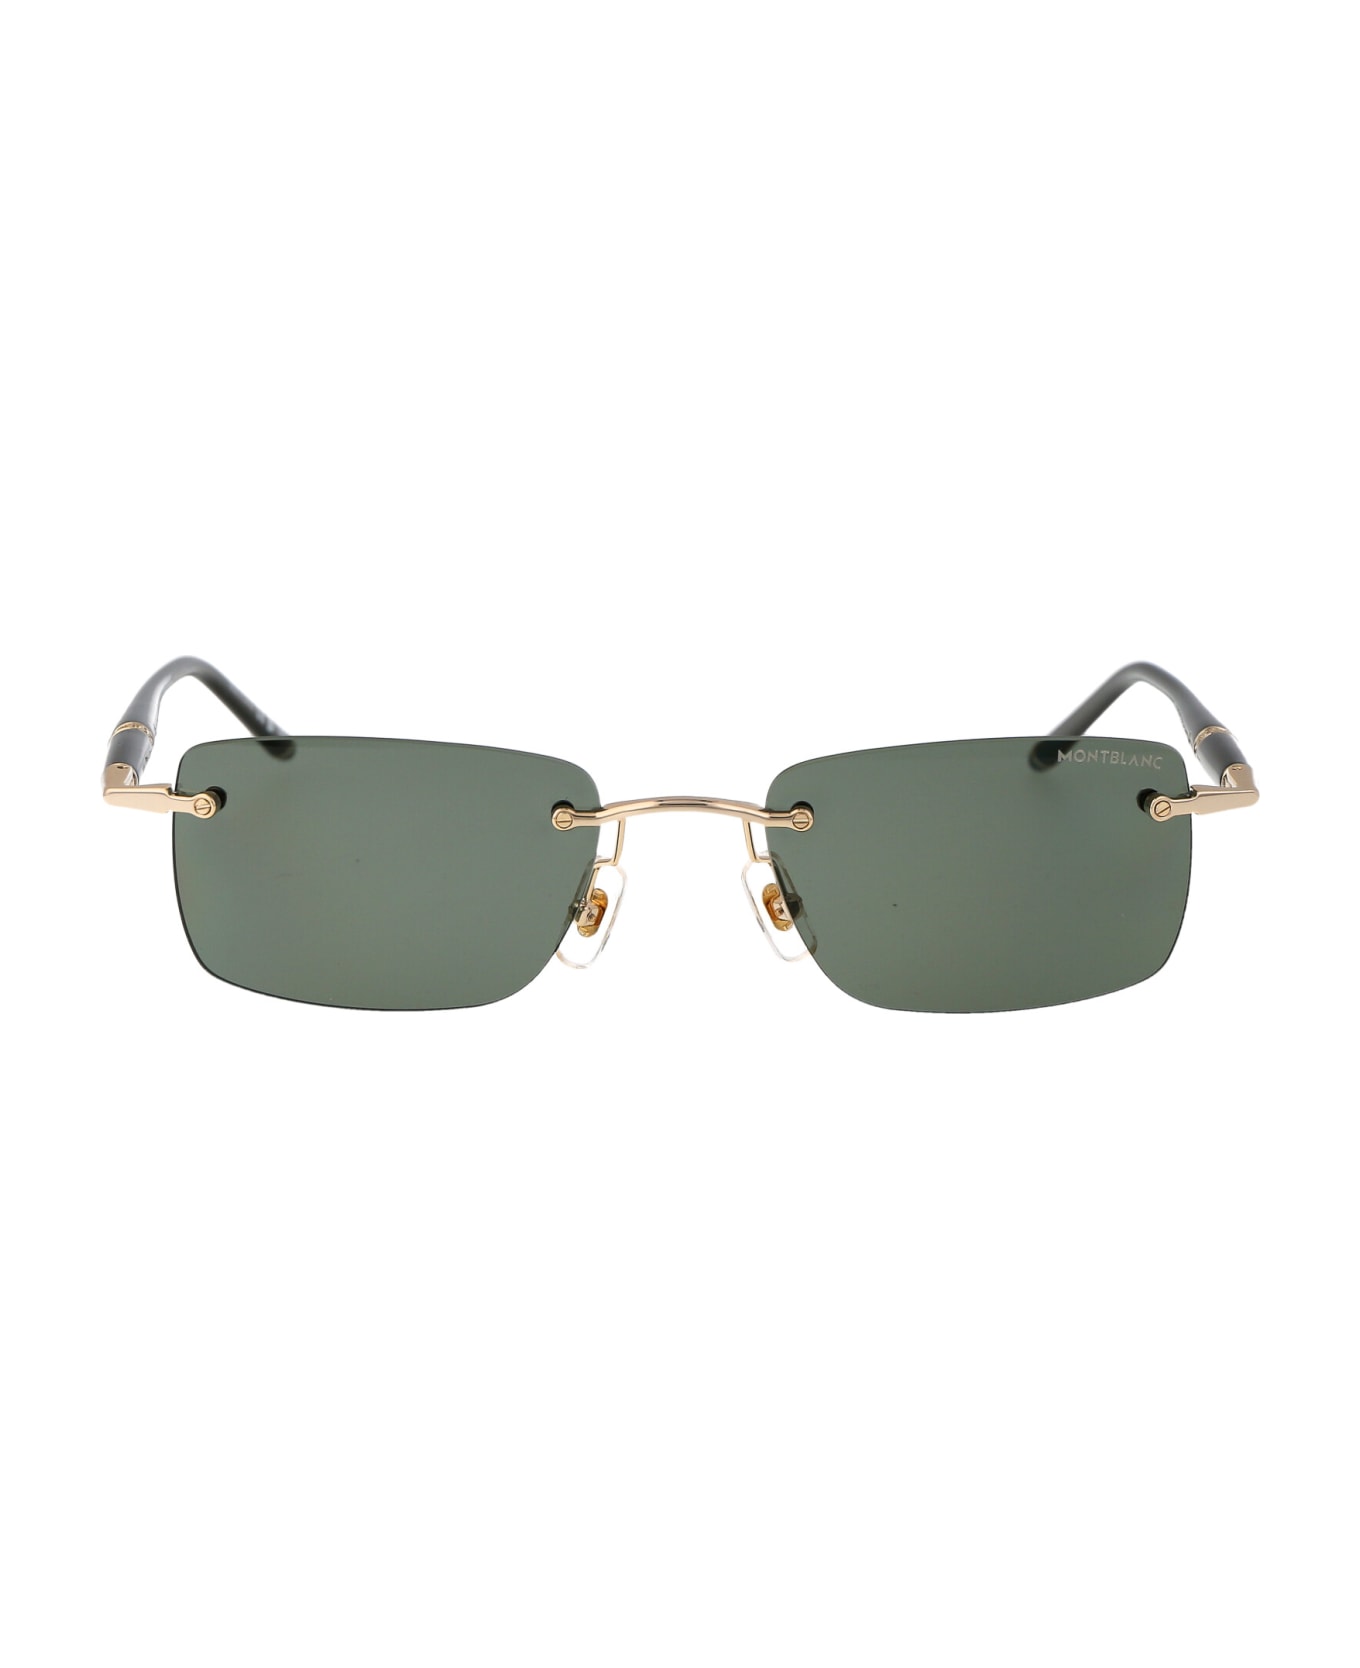 Montblanc Mb0344s Sunglasses - 005 GOLD GREY GREEN